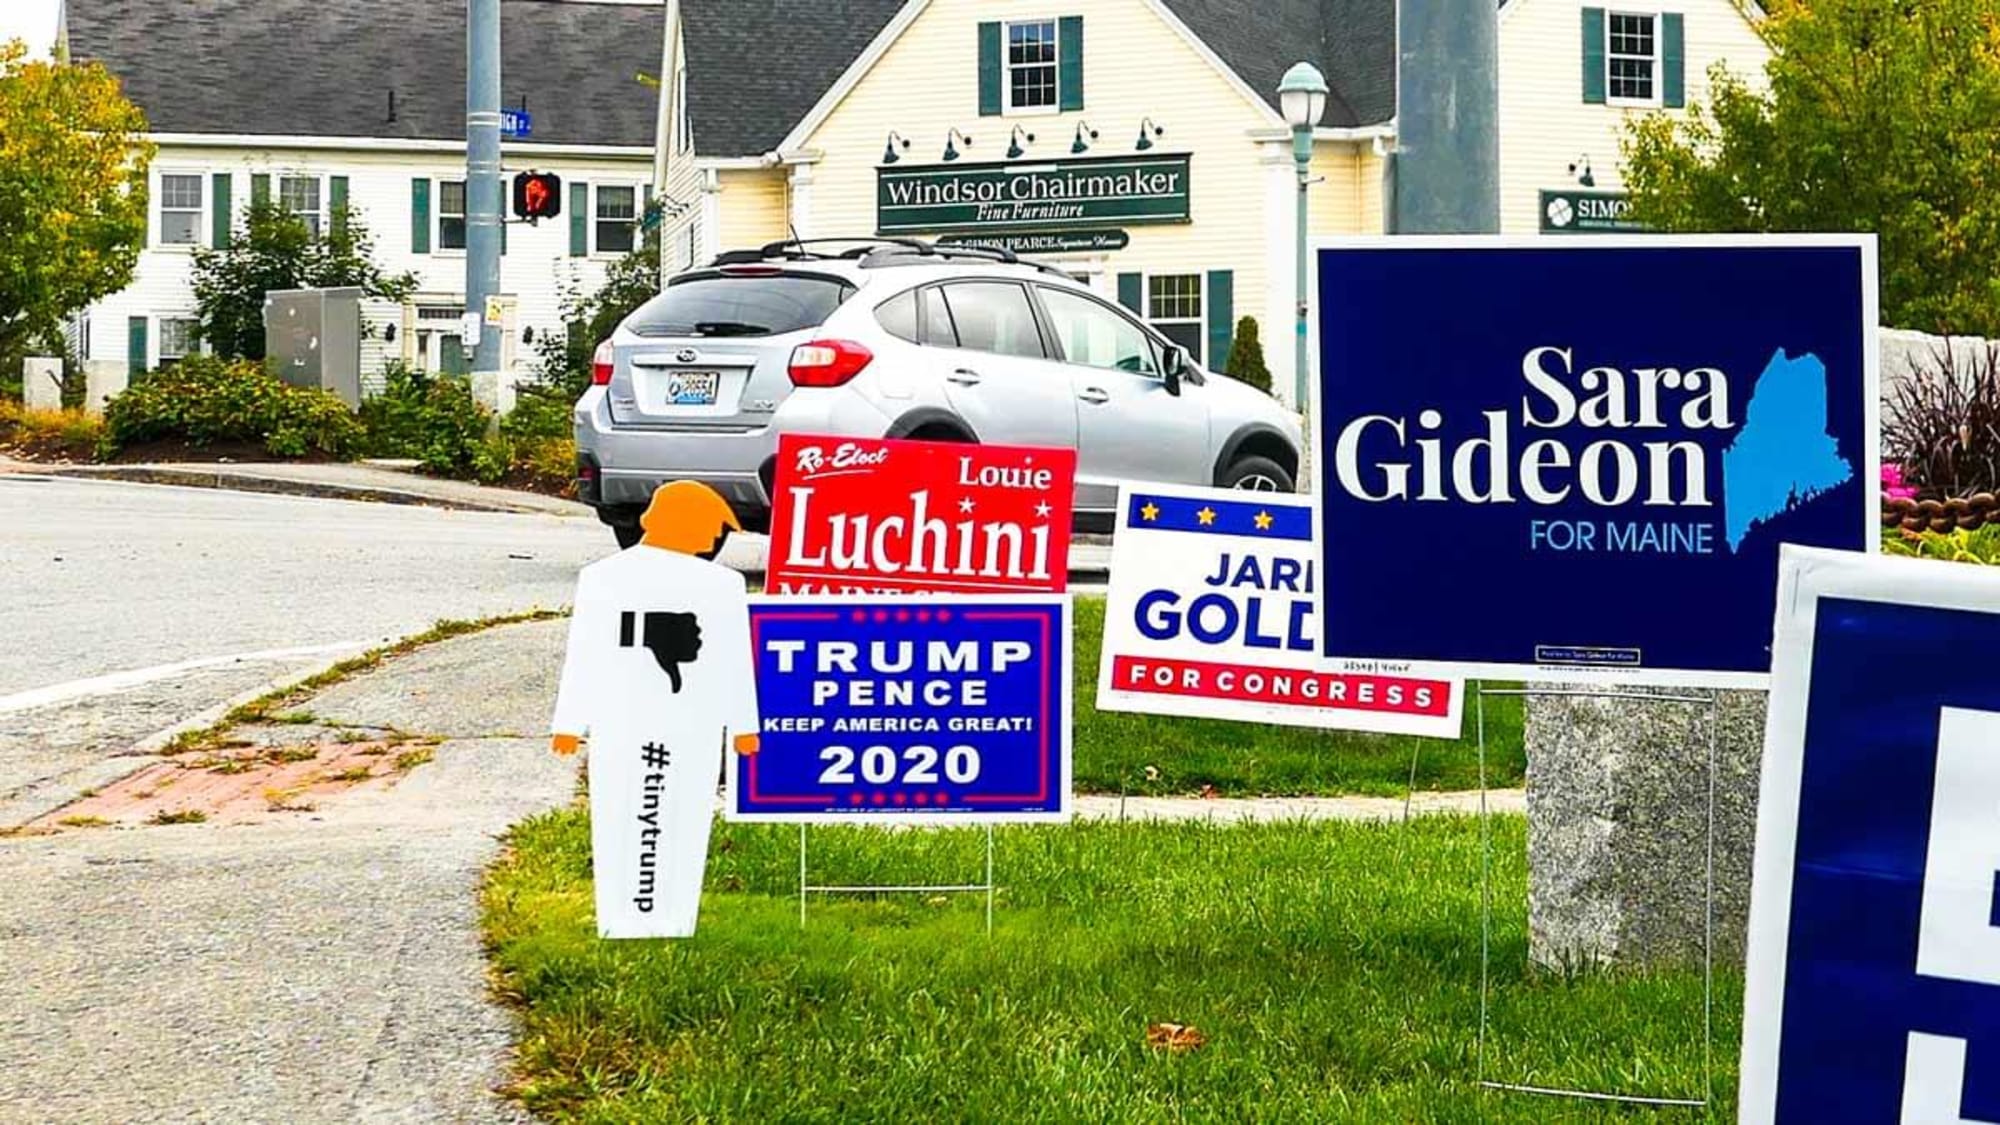 Photograph of a tiny trump lawn sign in a crowded jumble of other Democrat and Republican campaign signs. Needless to say, it stands out:)